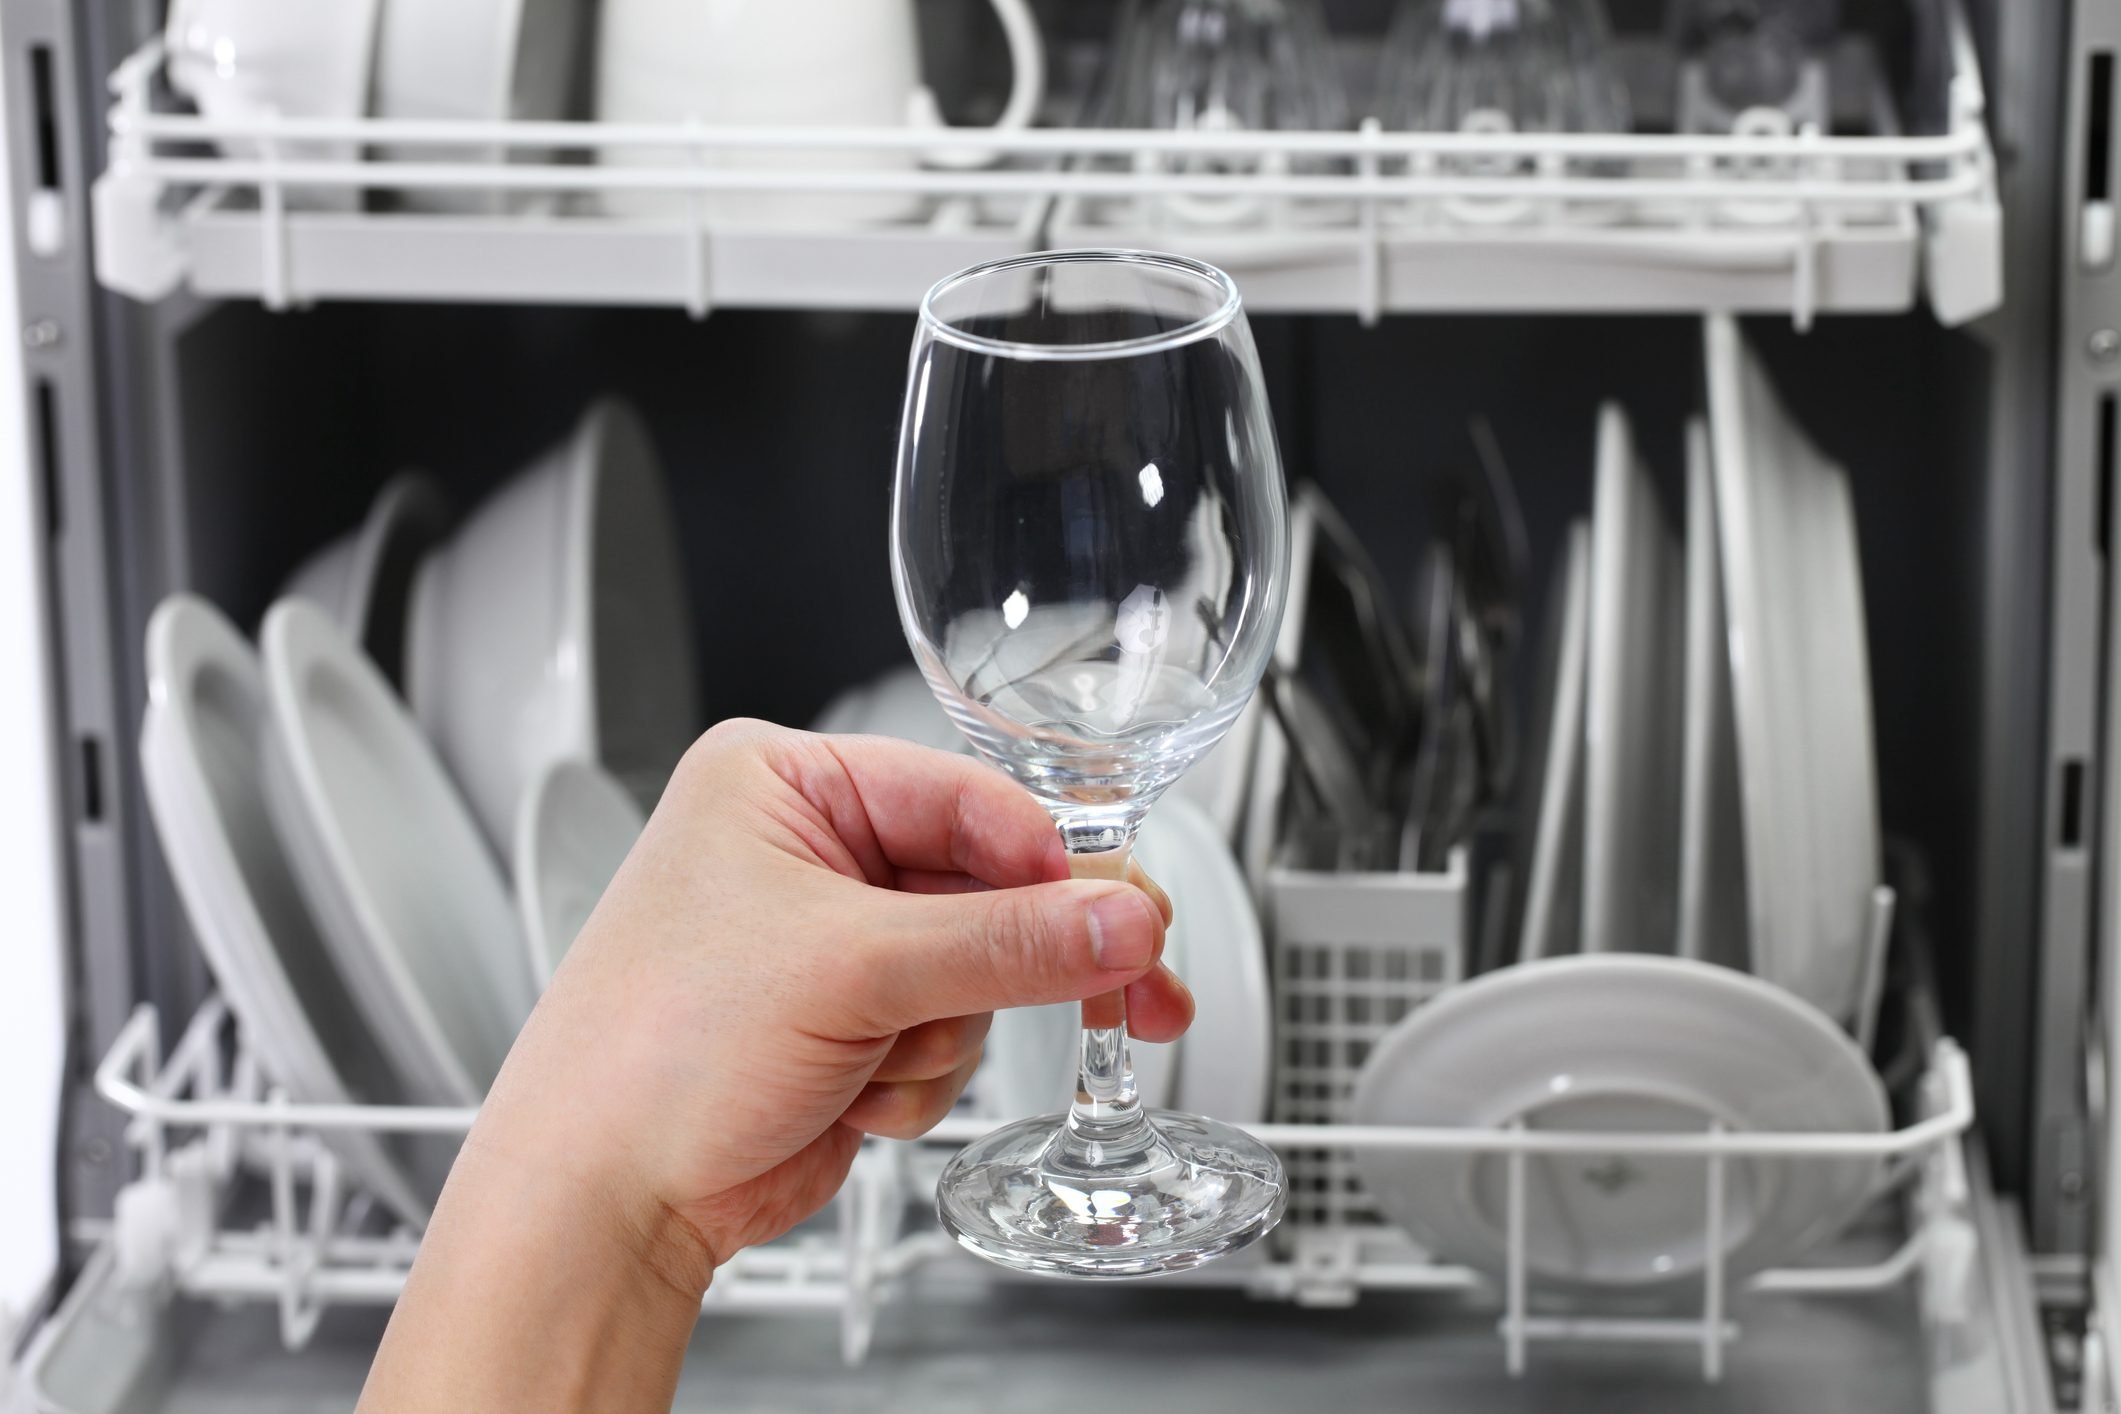 open dishwasher, man hand taking out clean wine glass, after washing